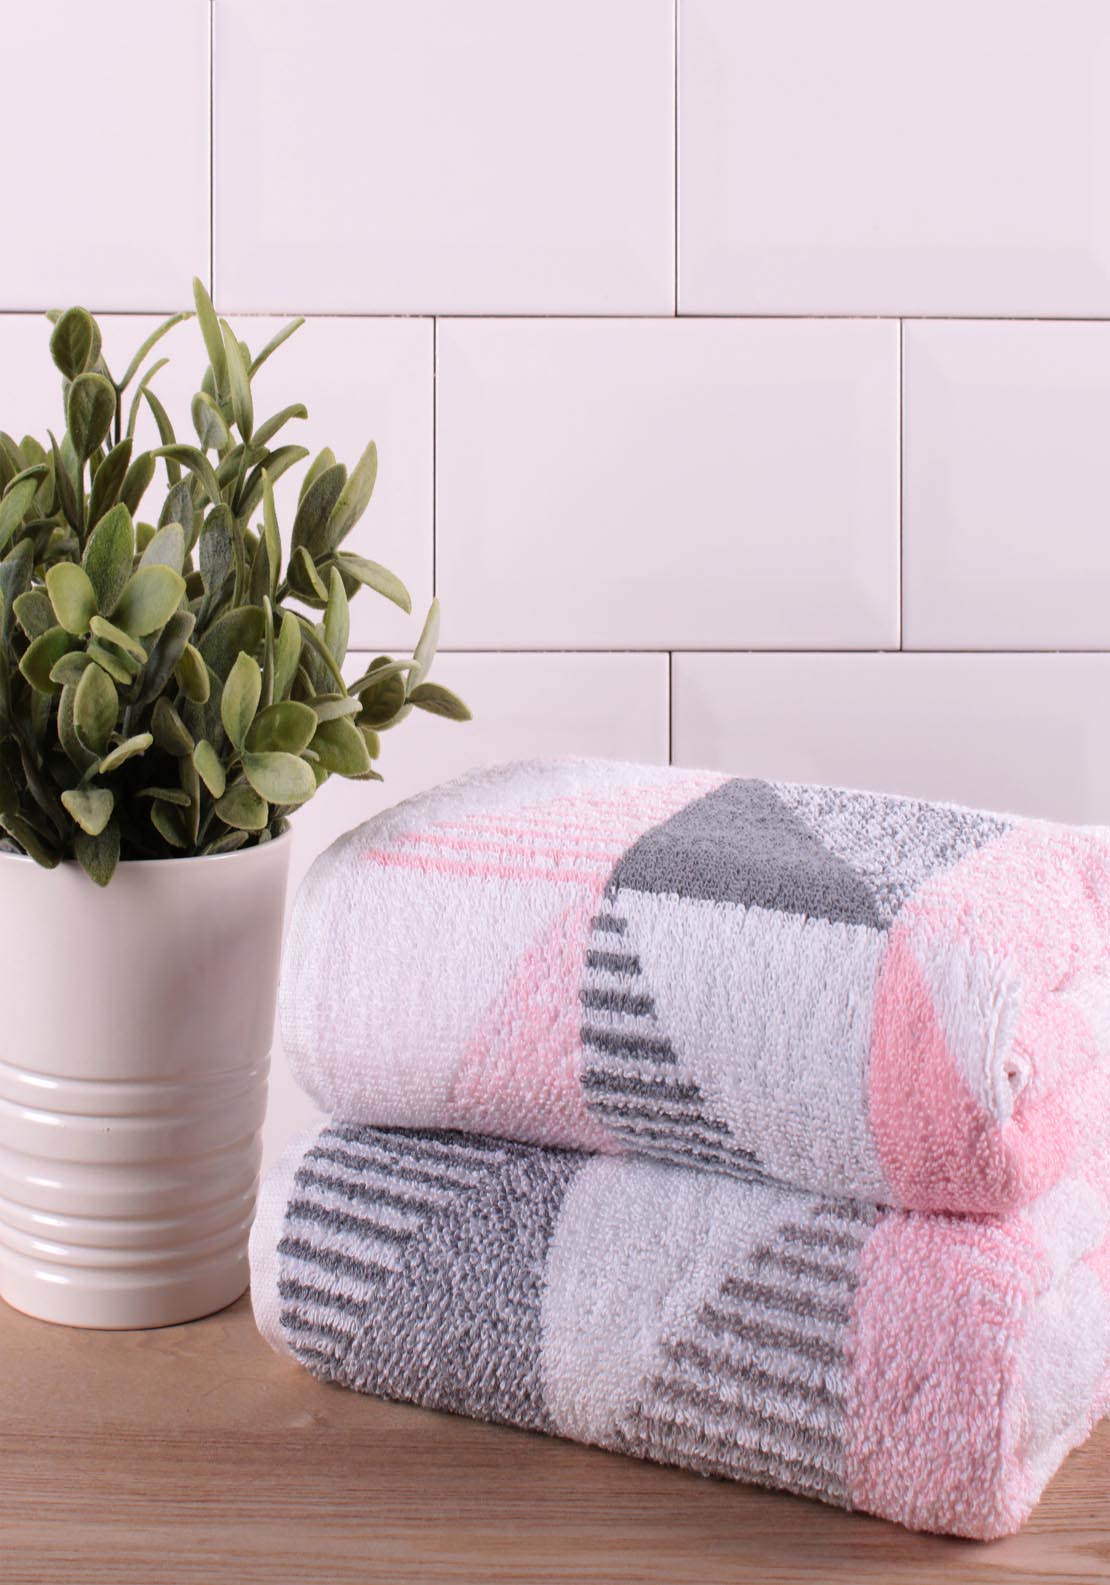 The Home Collection Hendra Bath Towel - Pink &amp; Grey 1 Shaws Department Stores